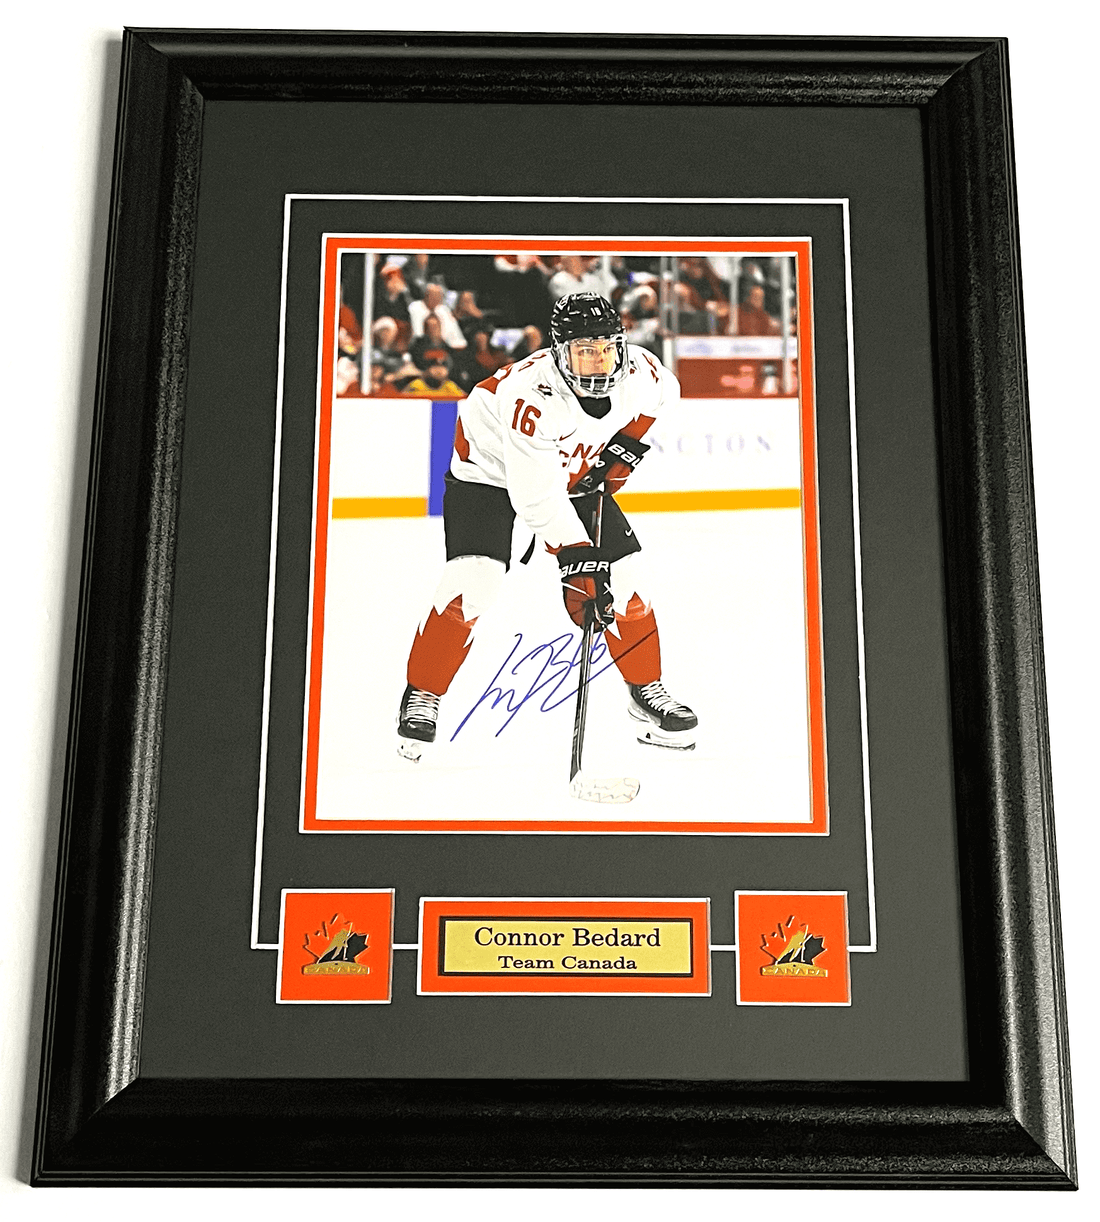 Connor Bedard Autograph Team Canada Framed Hockey Memorabilia. Accompanied with Certificate of Authentication.